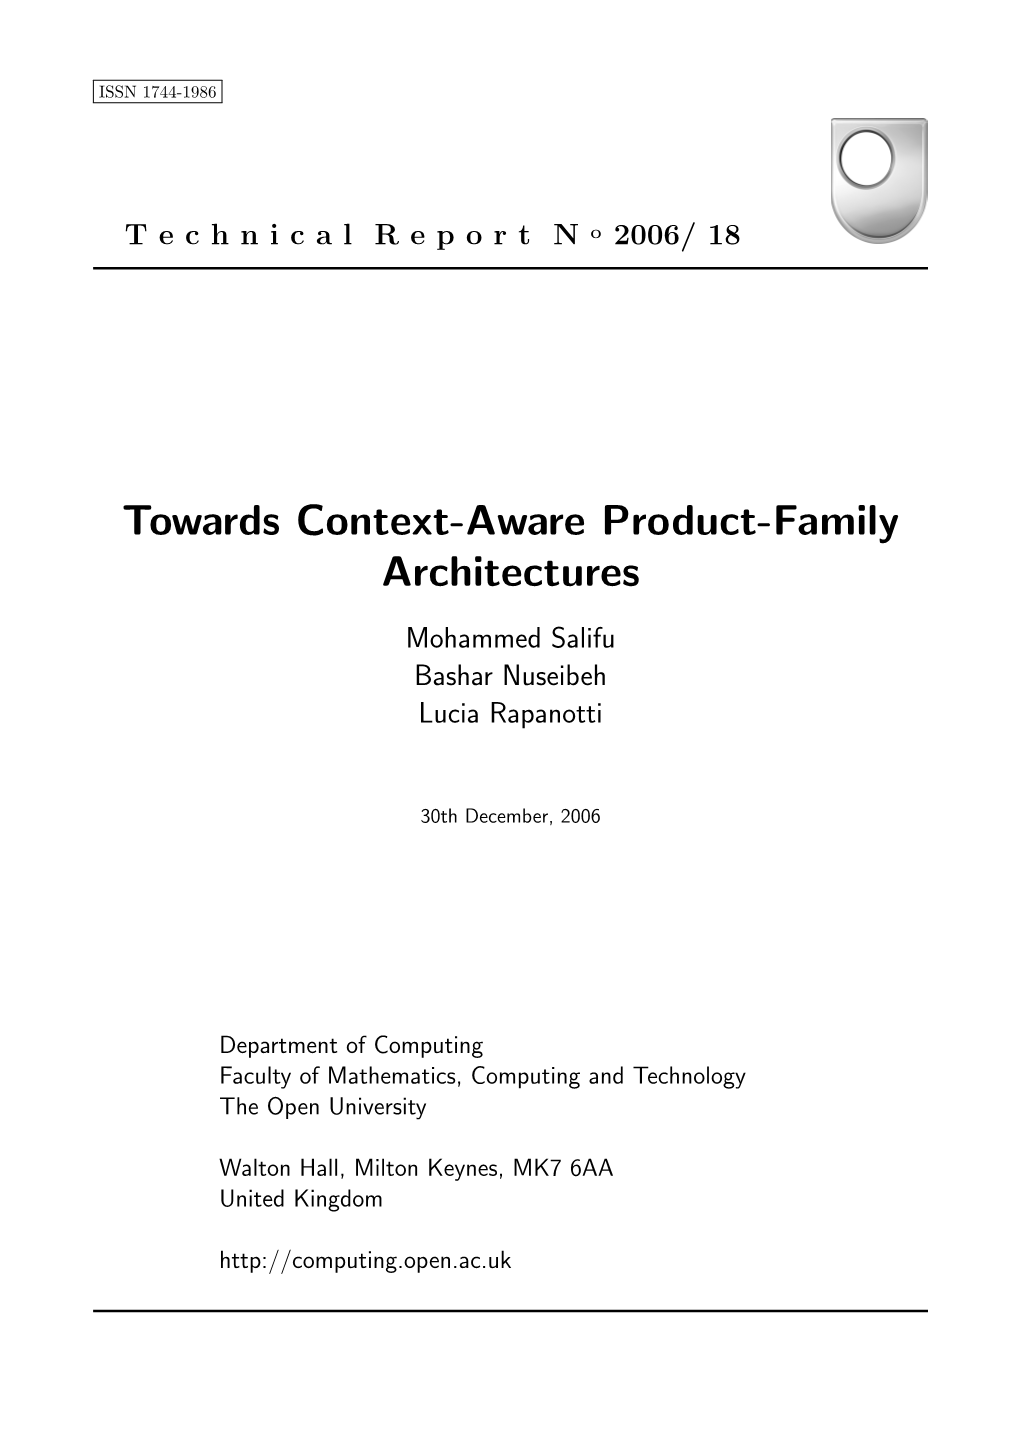 Towards Context-Aware Product-Family Architectures